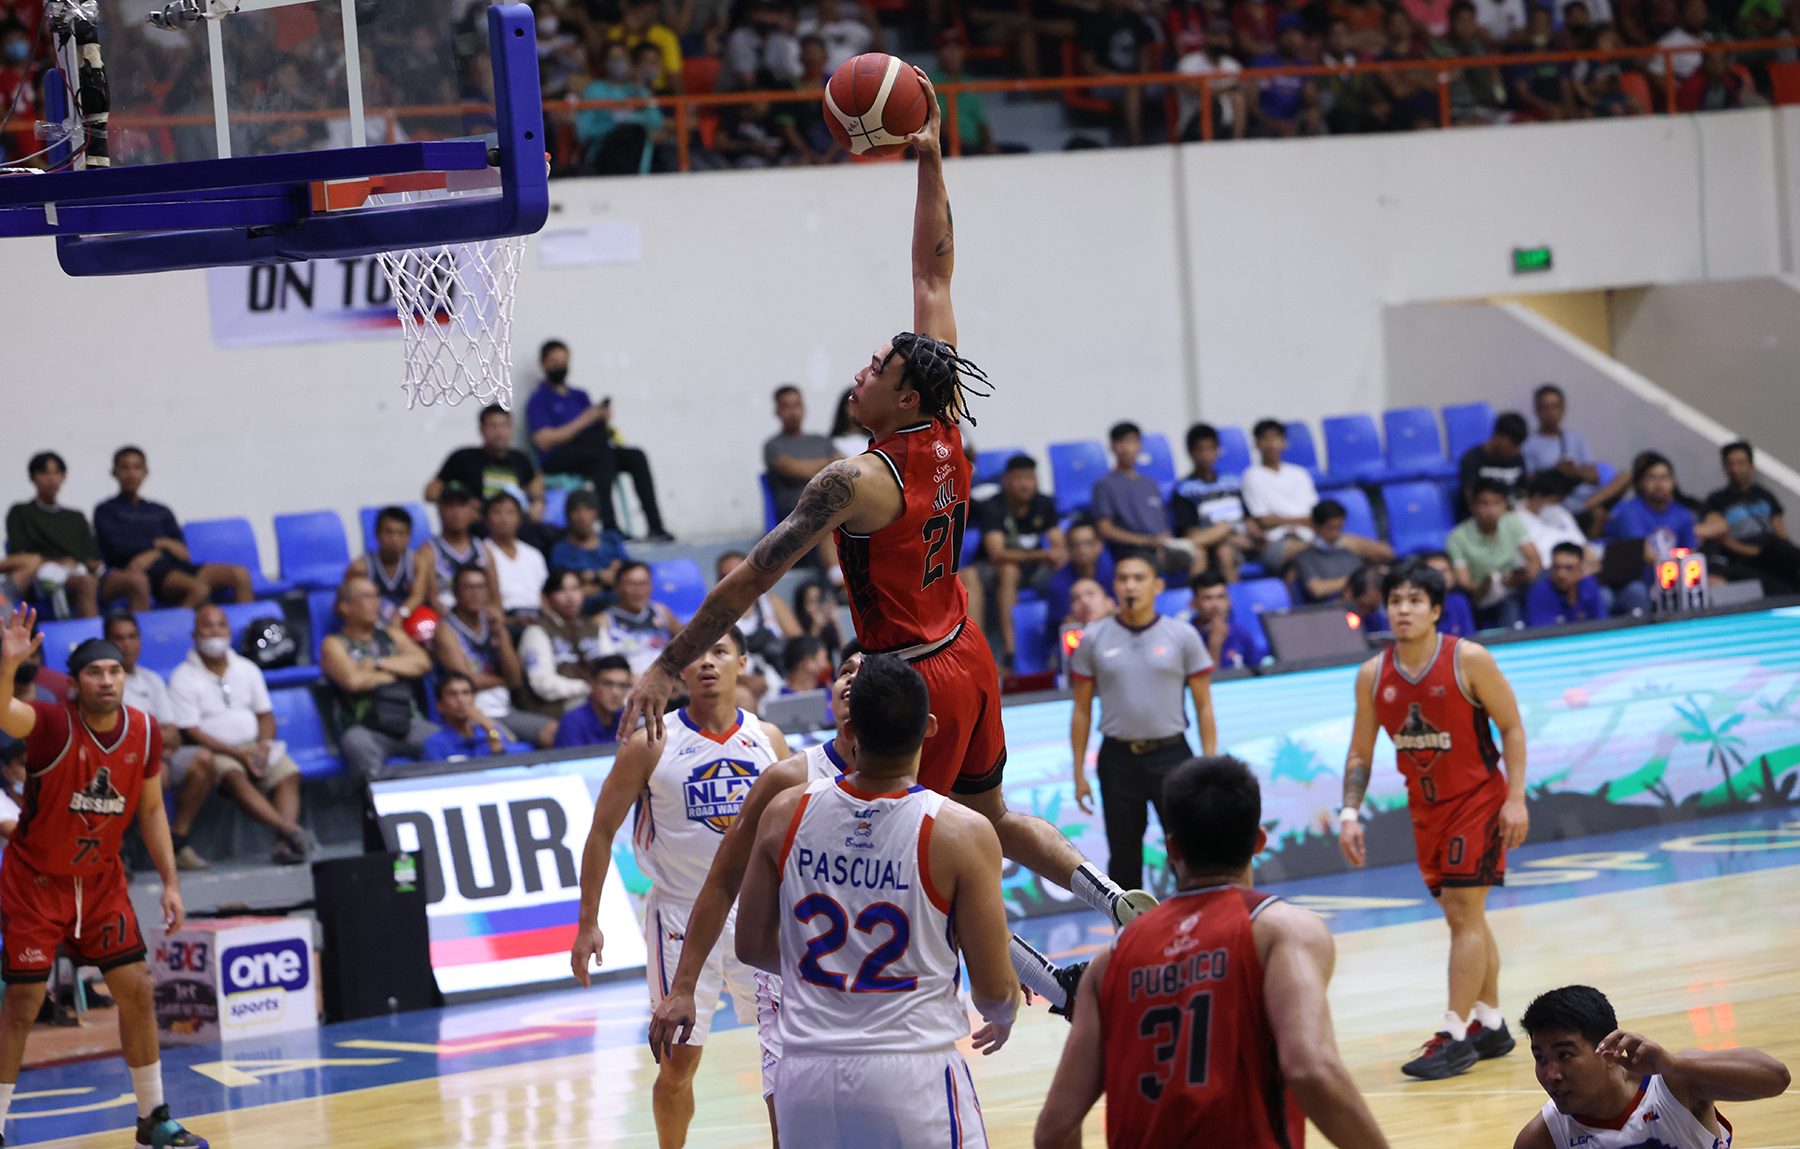 Blackwater survives NLEX rally as PBA On Tour kicks off with new rules in play